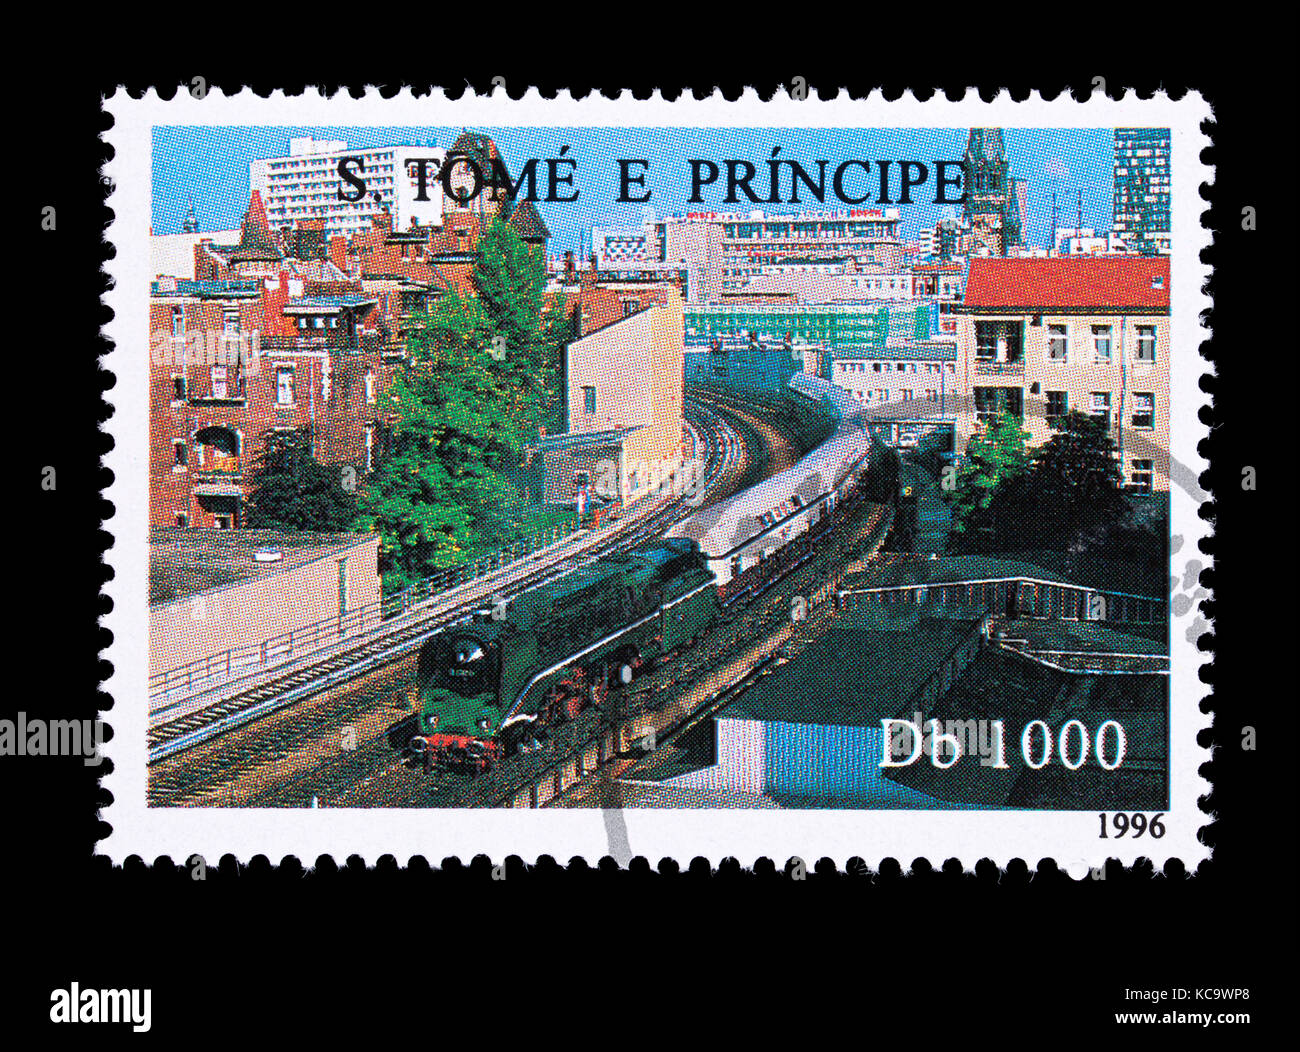 Postage stamp from the St. Thomas and Prince Islands depicting a train in an urban environment Stock Photo